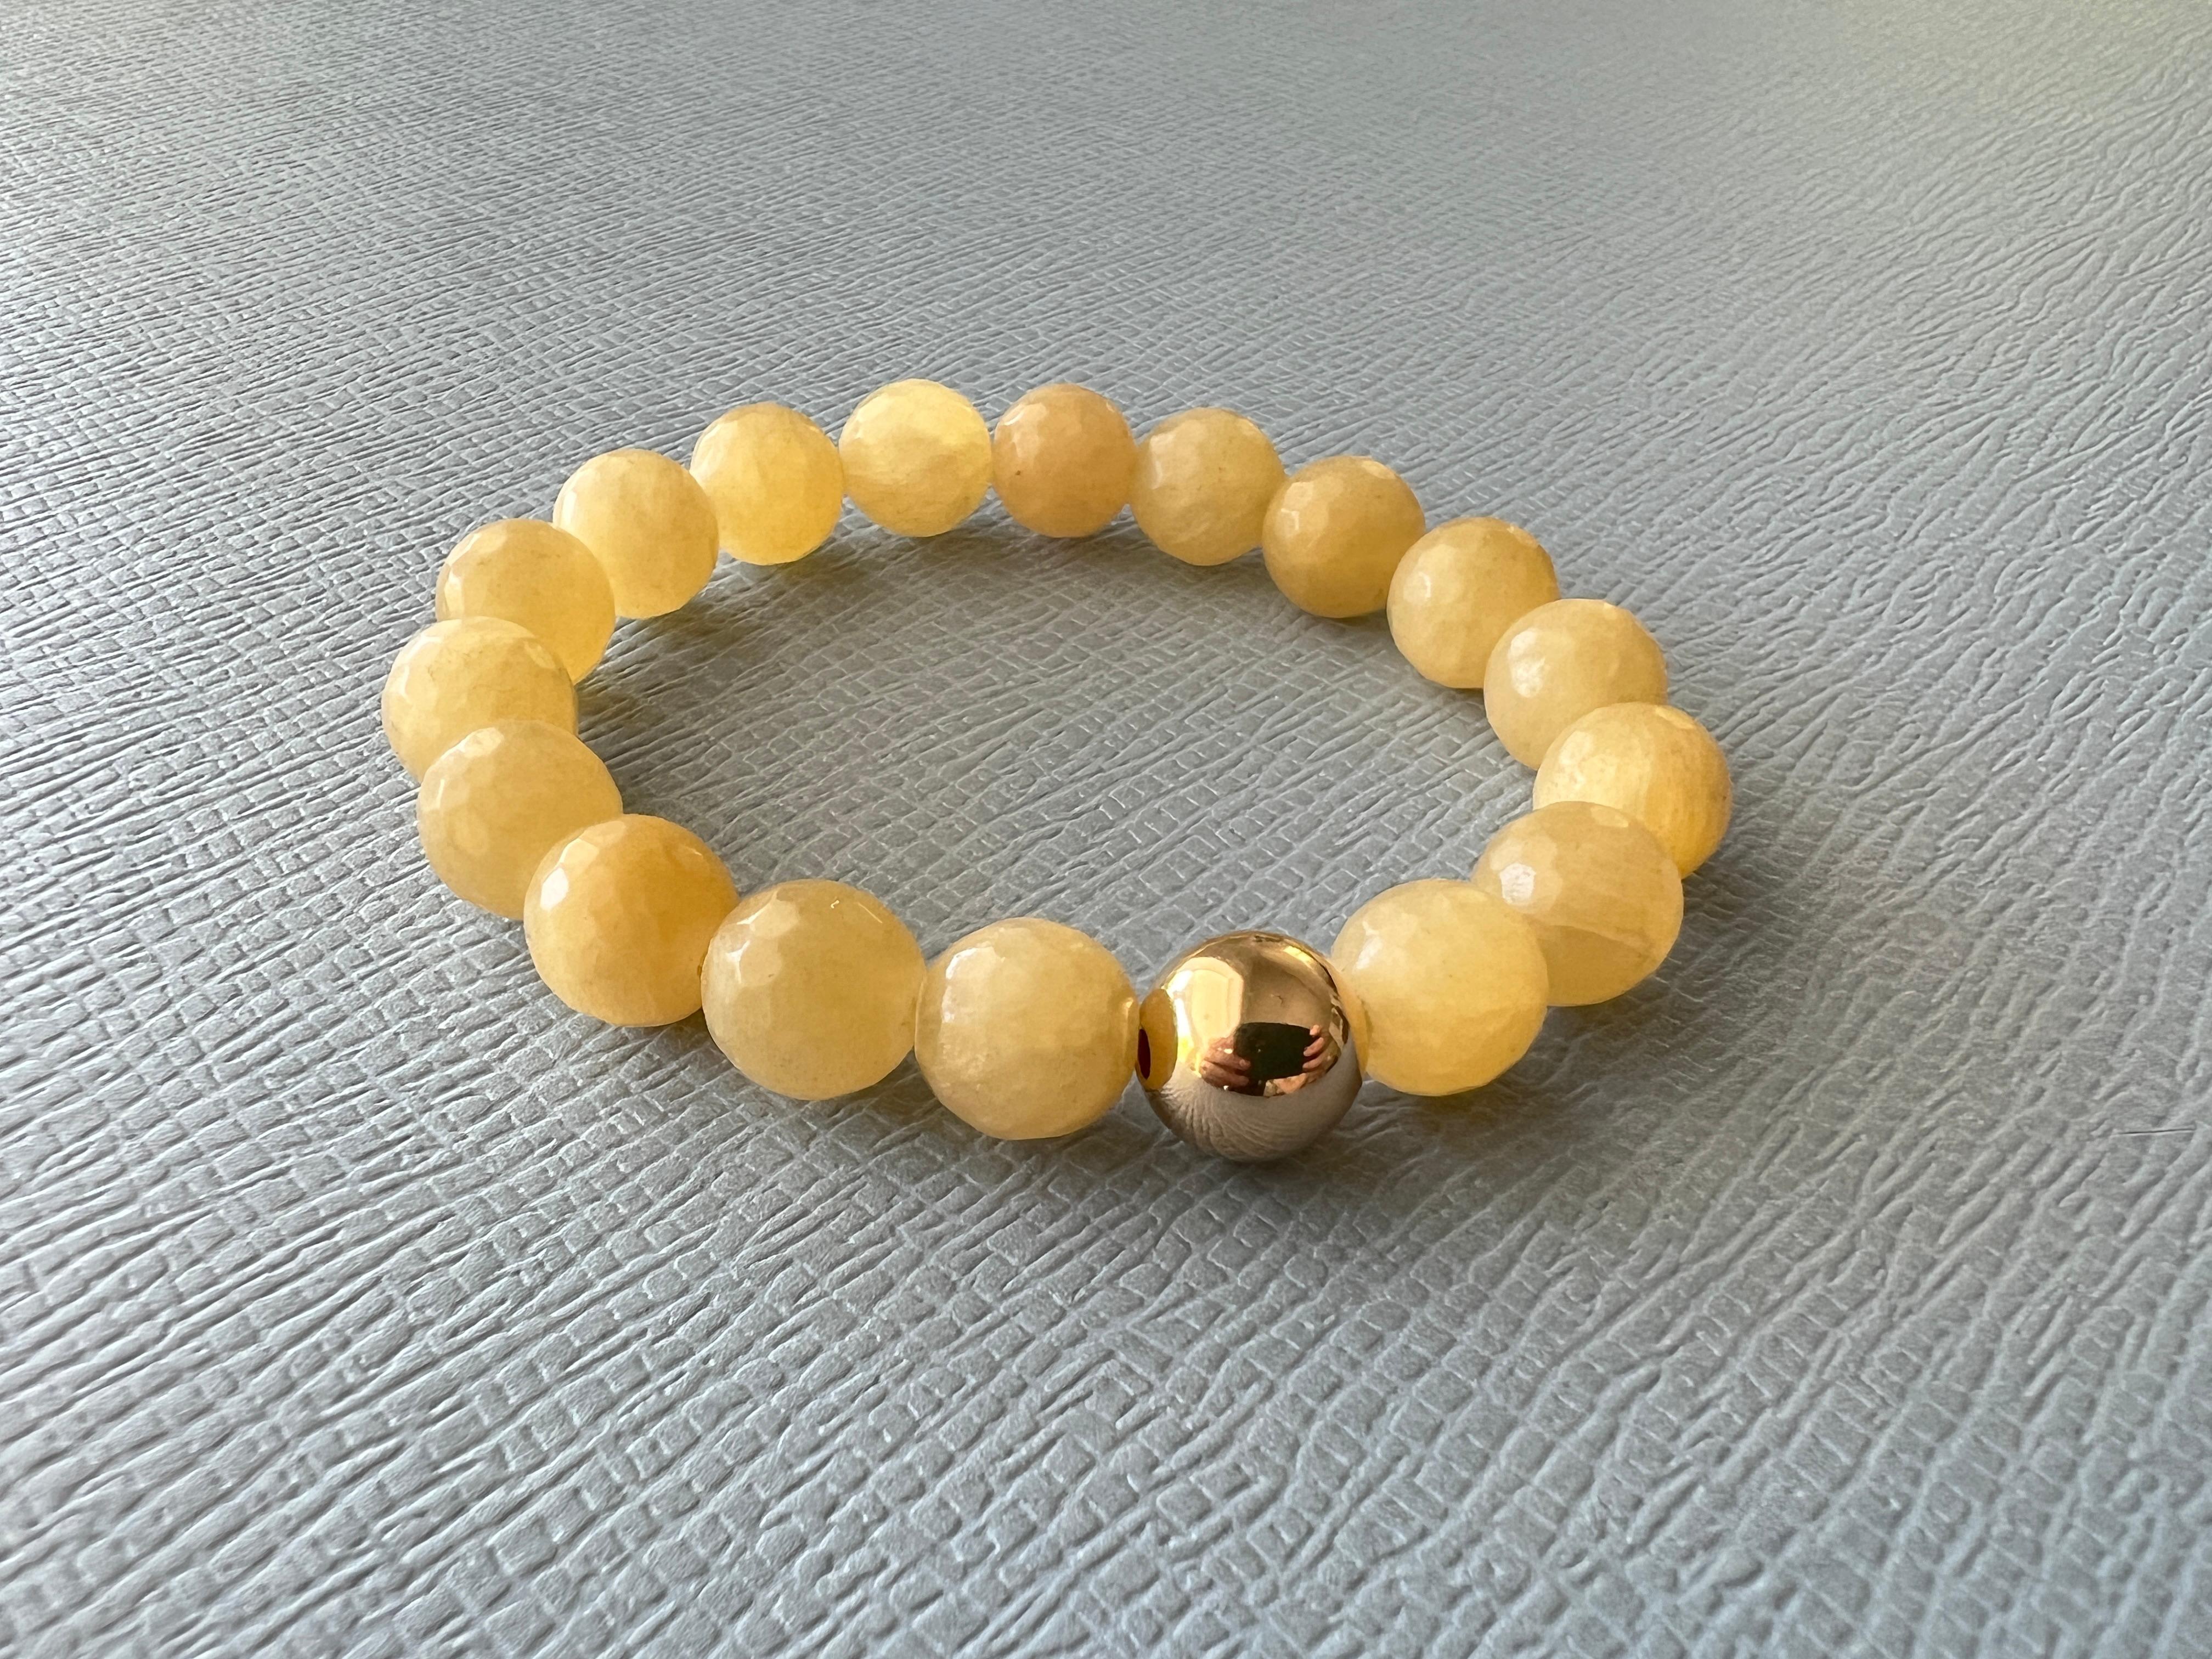 Yellow Calcite Round Facteted Bead Bracelet Gold Filled Bead J Dauphin For Sale 3